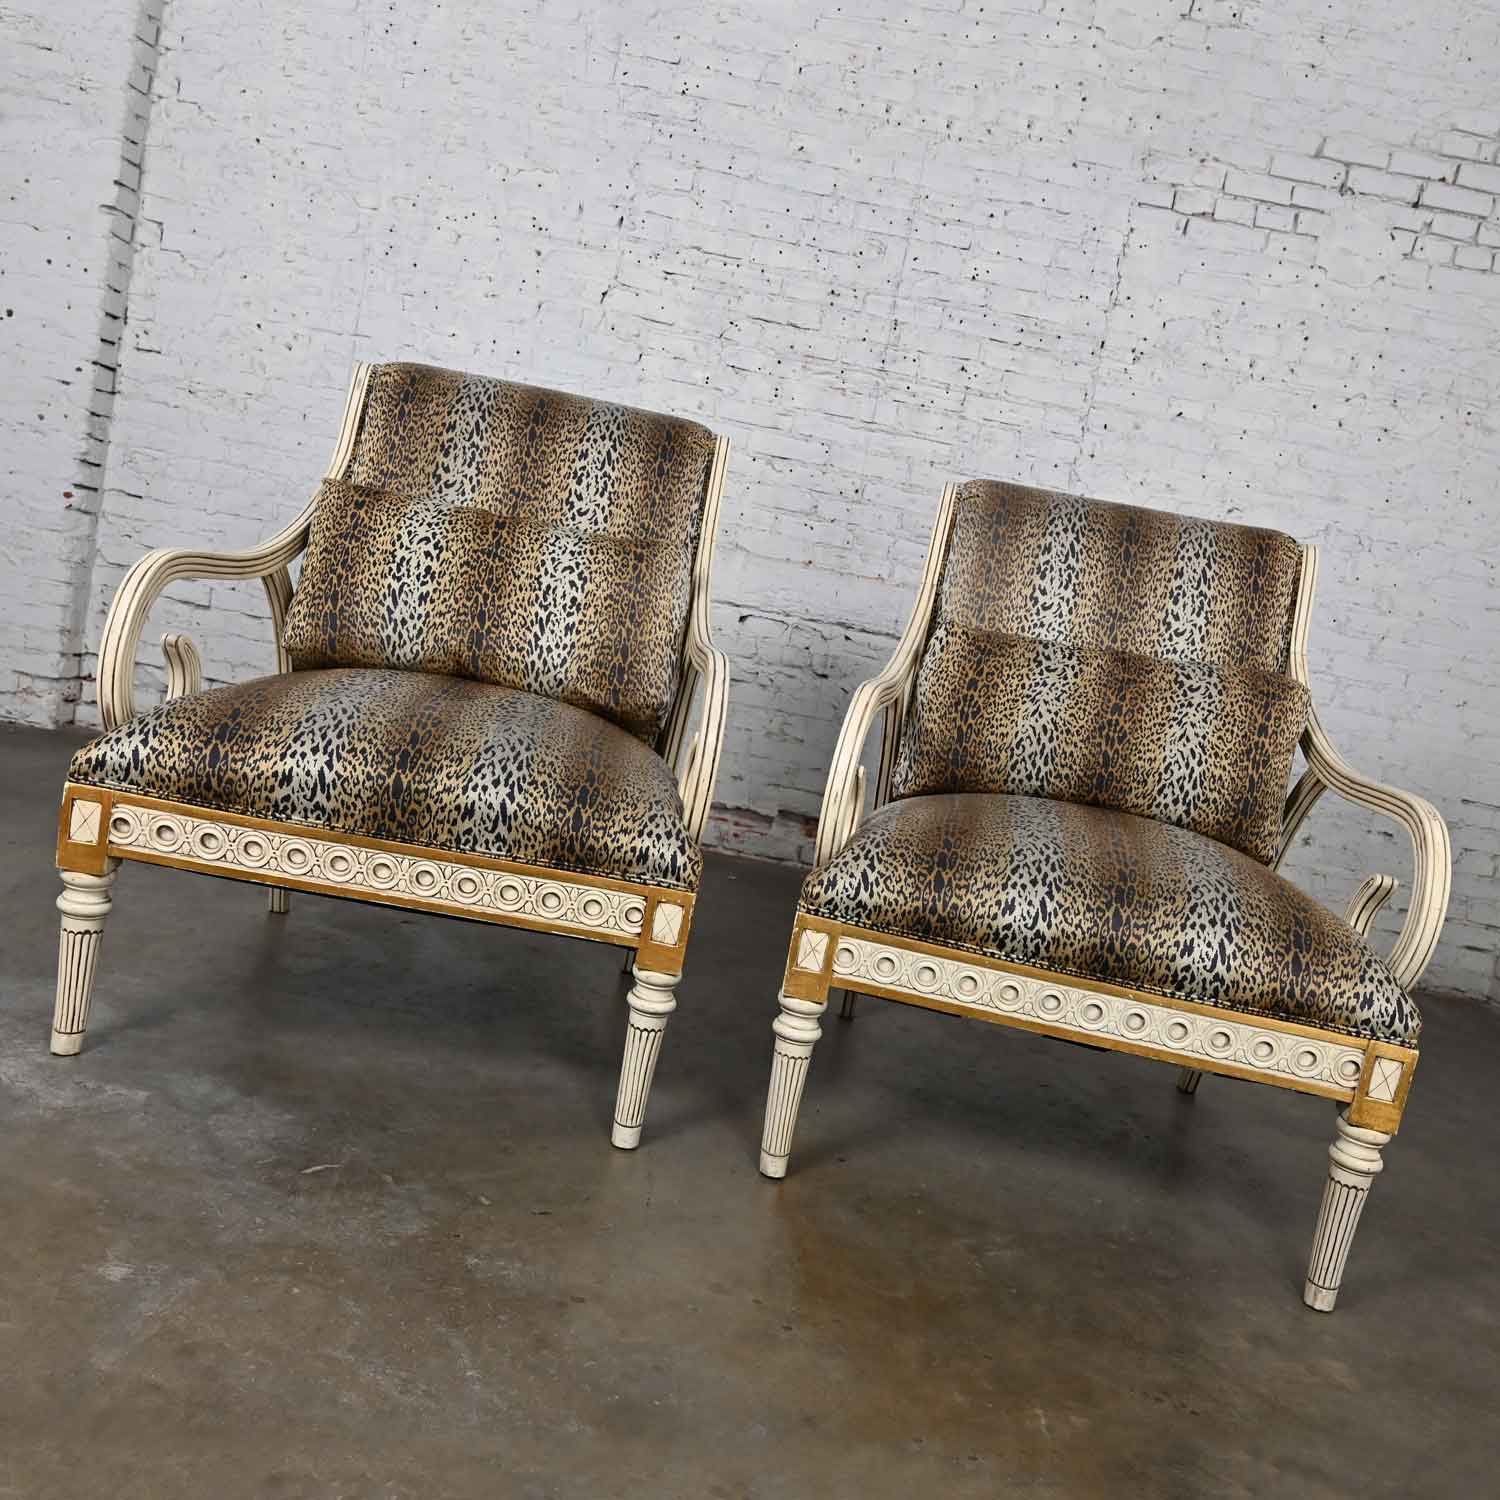 Marvelous vintage Henredon Neoclassic Revival animal print fabric and off white and gilt frame large scale fireside chairs, a pair. Beautiful condition, keeping in mind that this is vintage and not new so will have signs of use and wear. There is